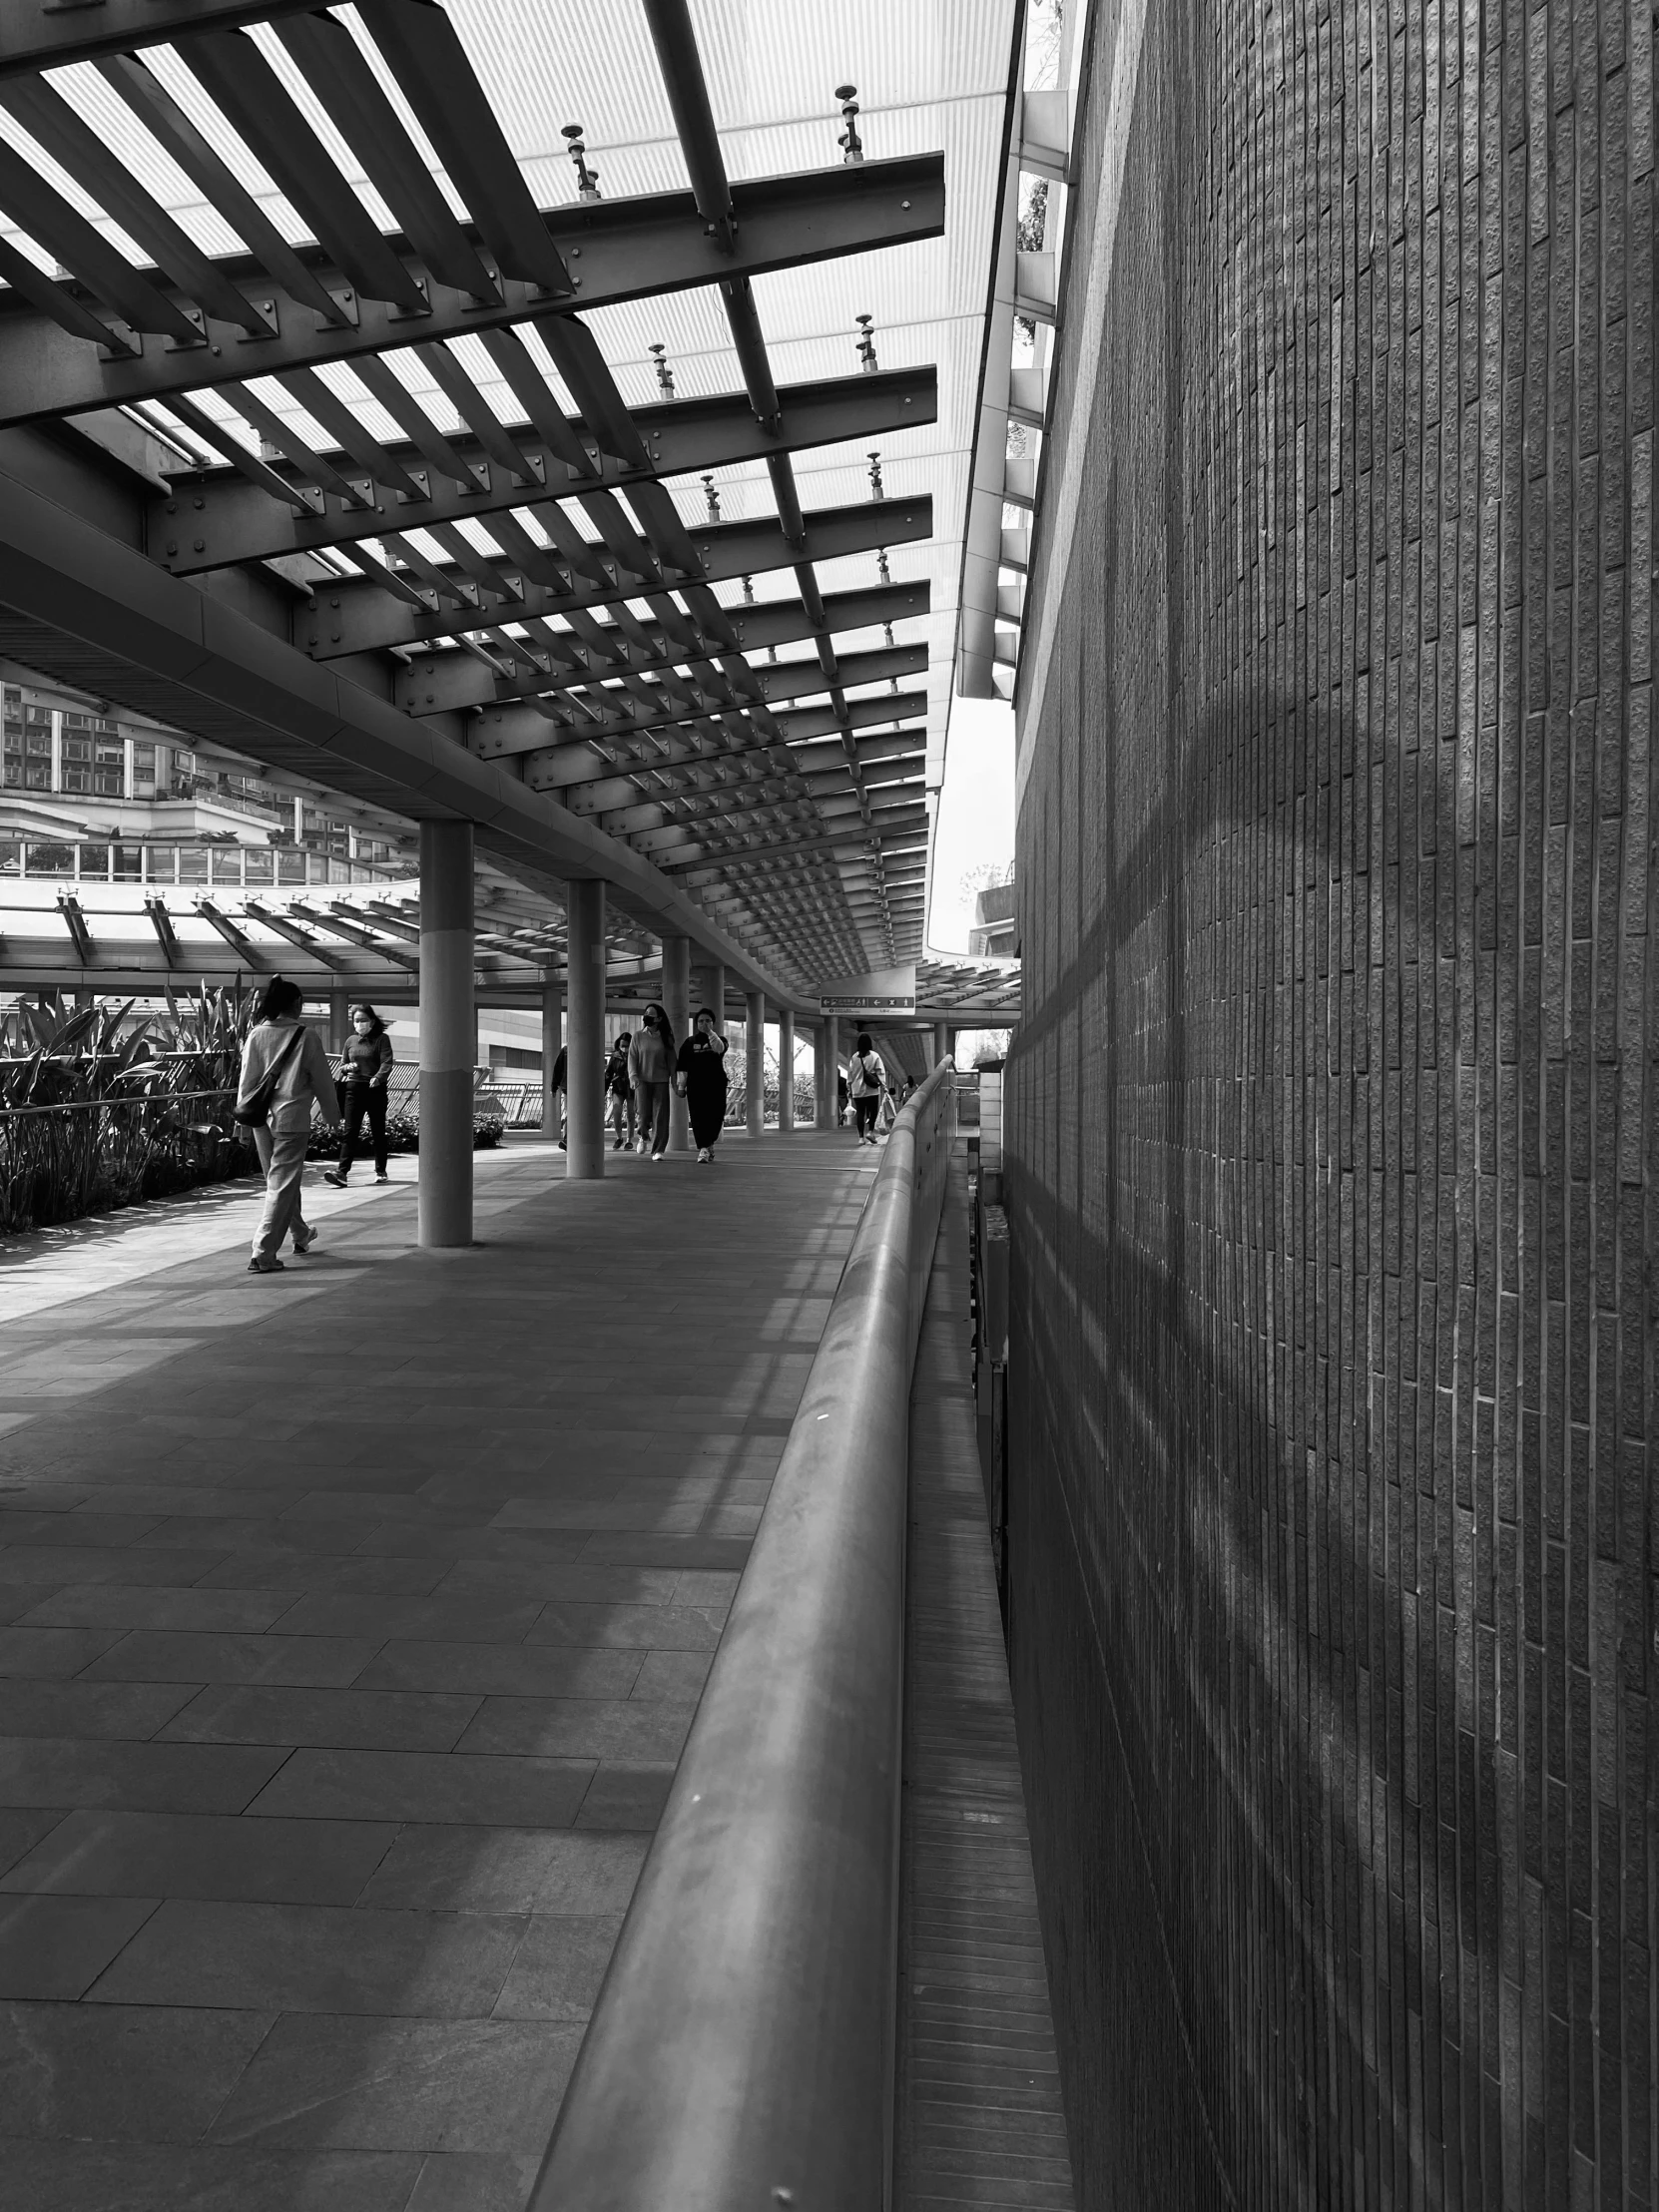 this is a black and white picture of a train station